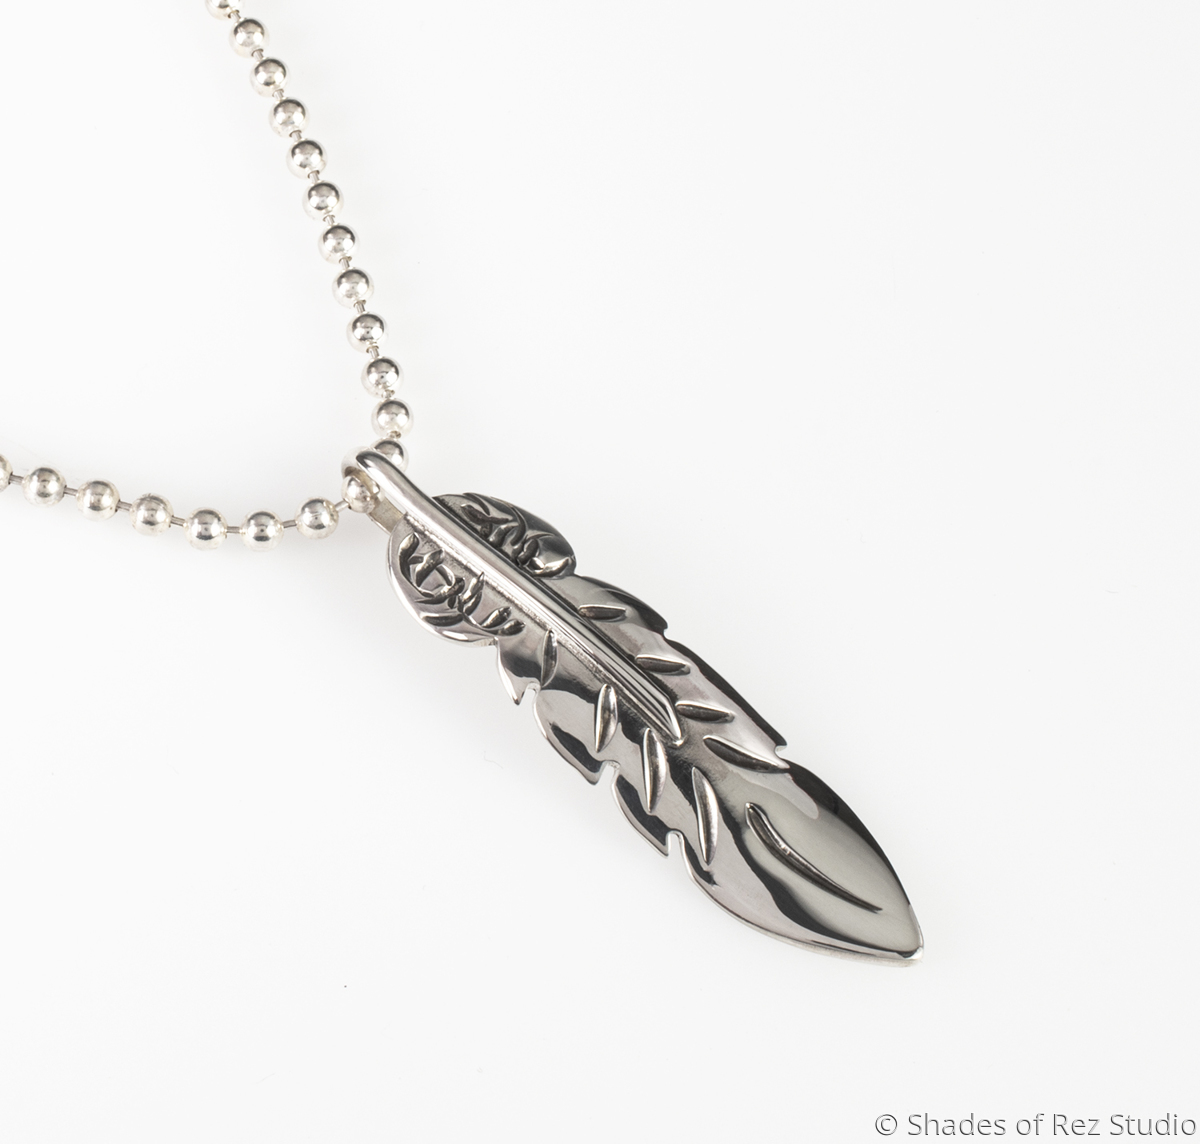 Eagle Feather Necklace - Shades of Rez Studio | Designs by Tim Blueflint